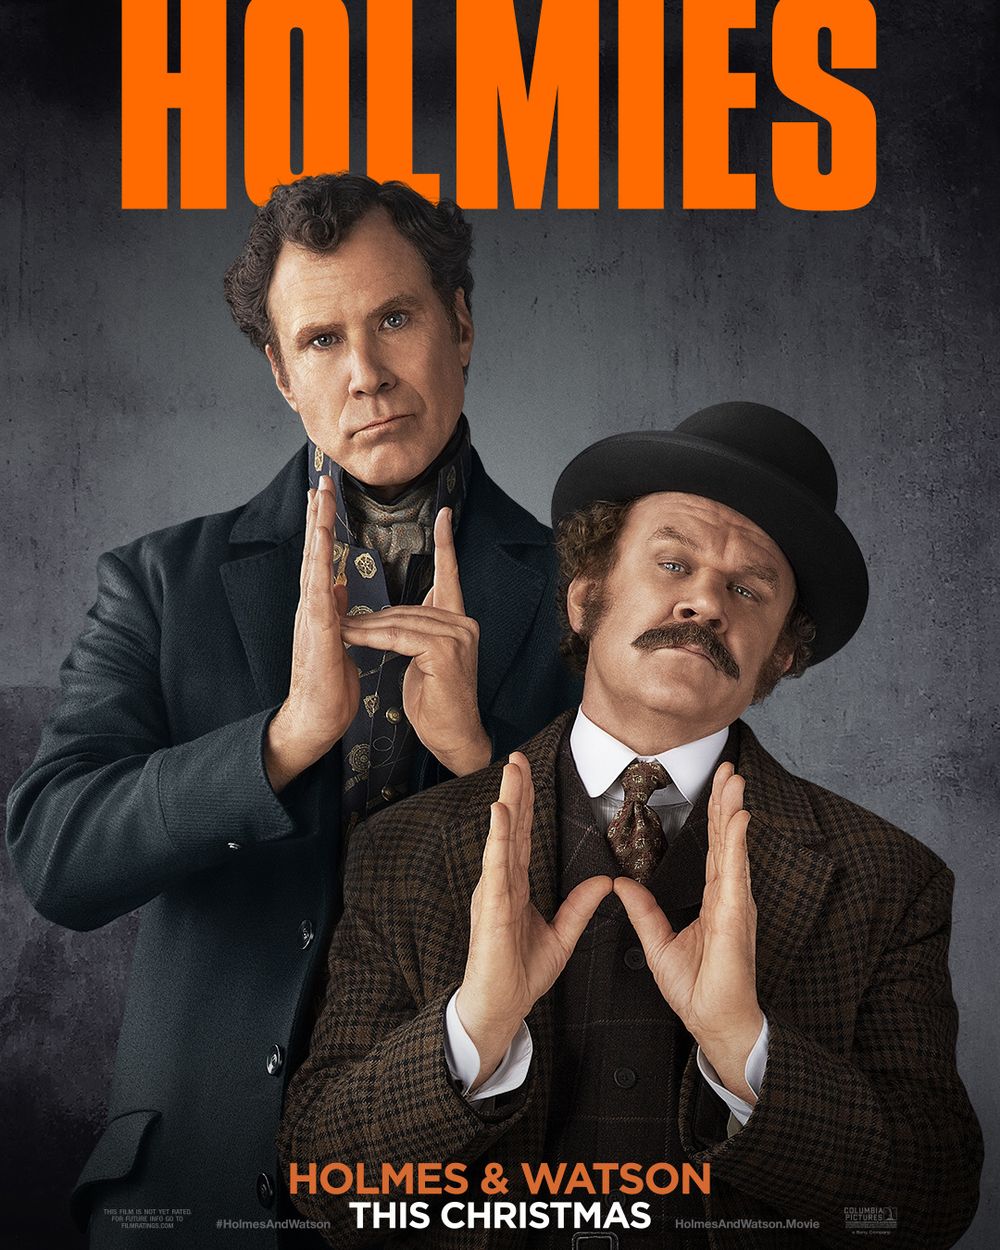 Holmes & Watson Movie Review